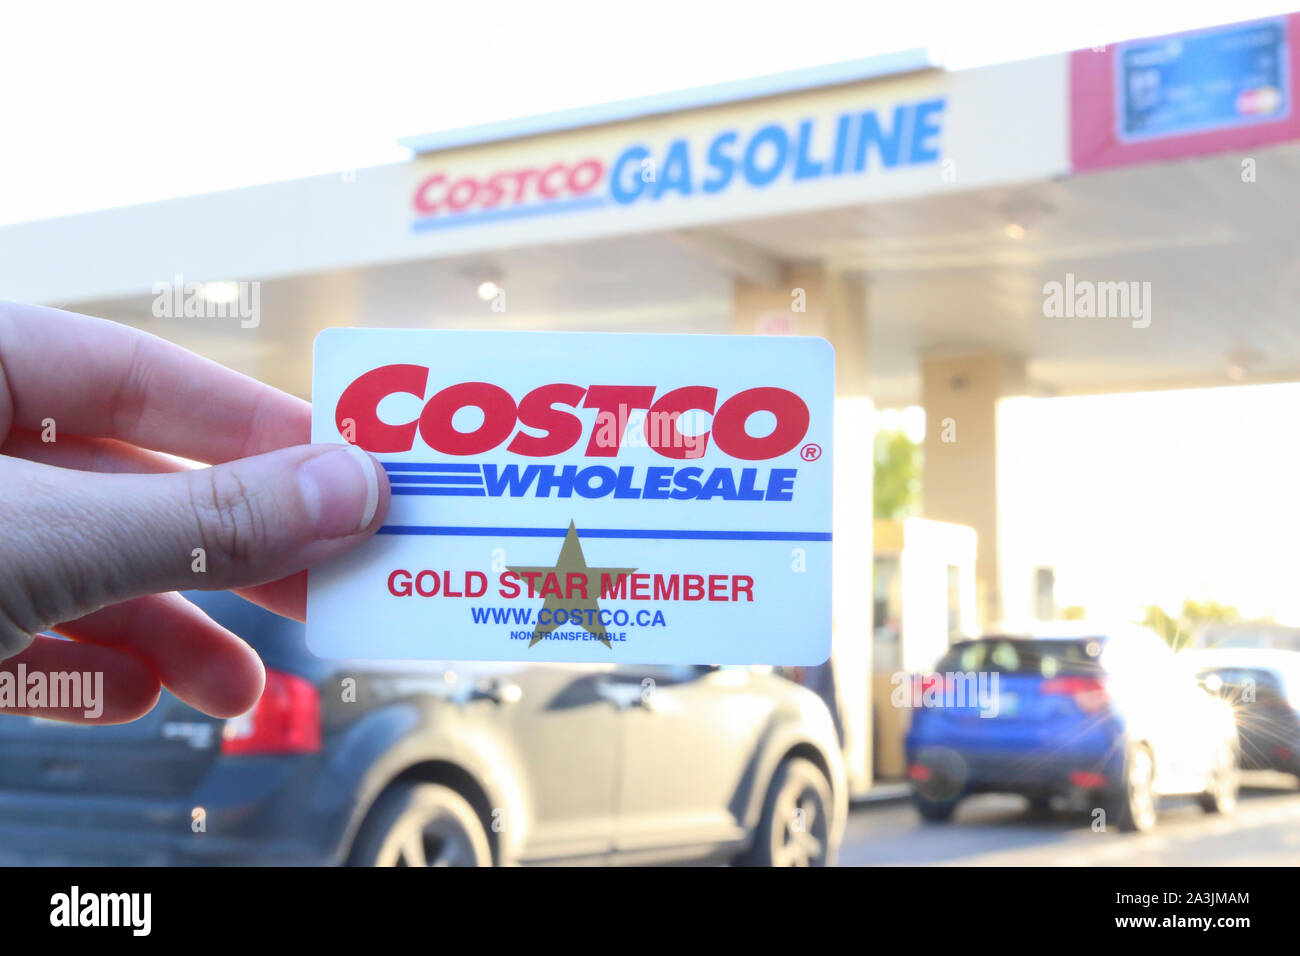 Winnipeg, Manitoba / Canada - October 7, 2019: Costco Card Membership in the First Plan with Cars Line at Gas Station in the Background. Stock Photo